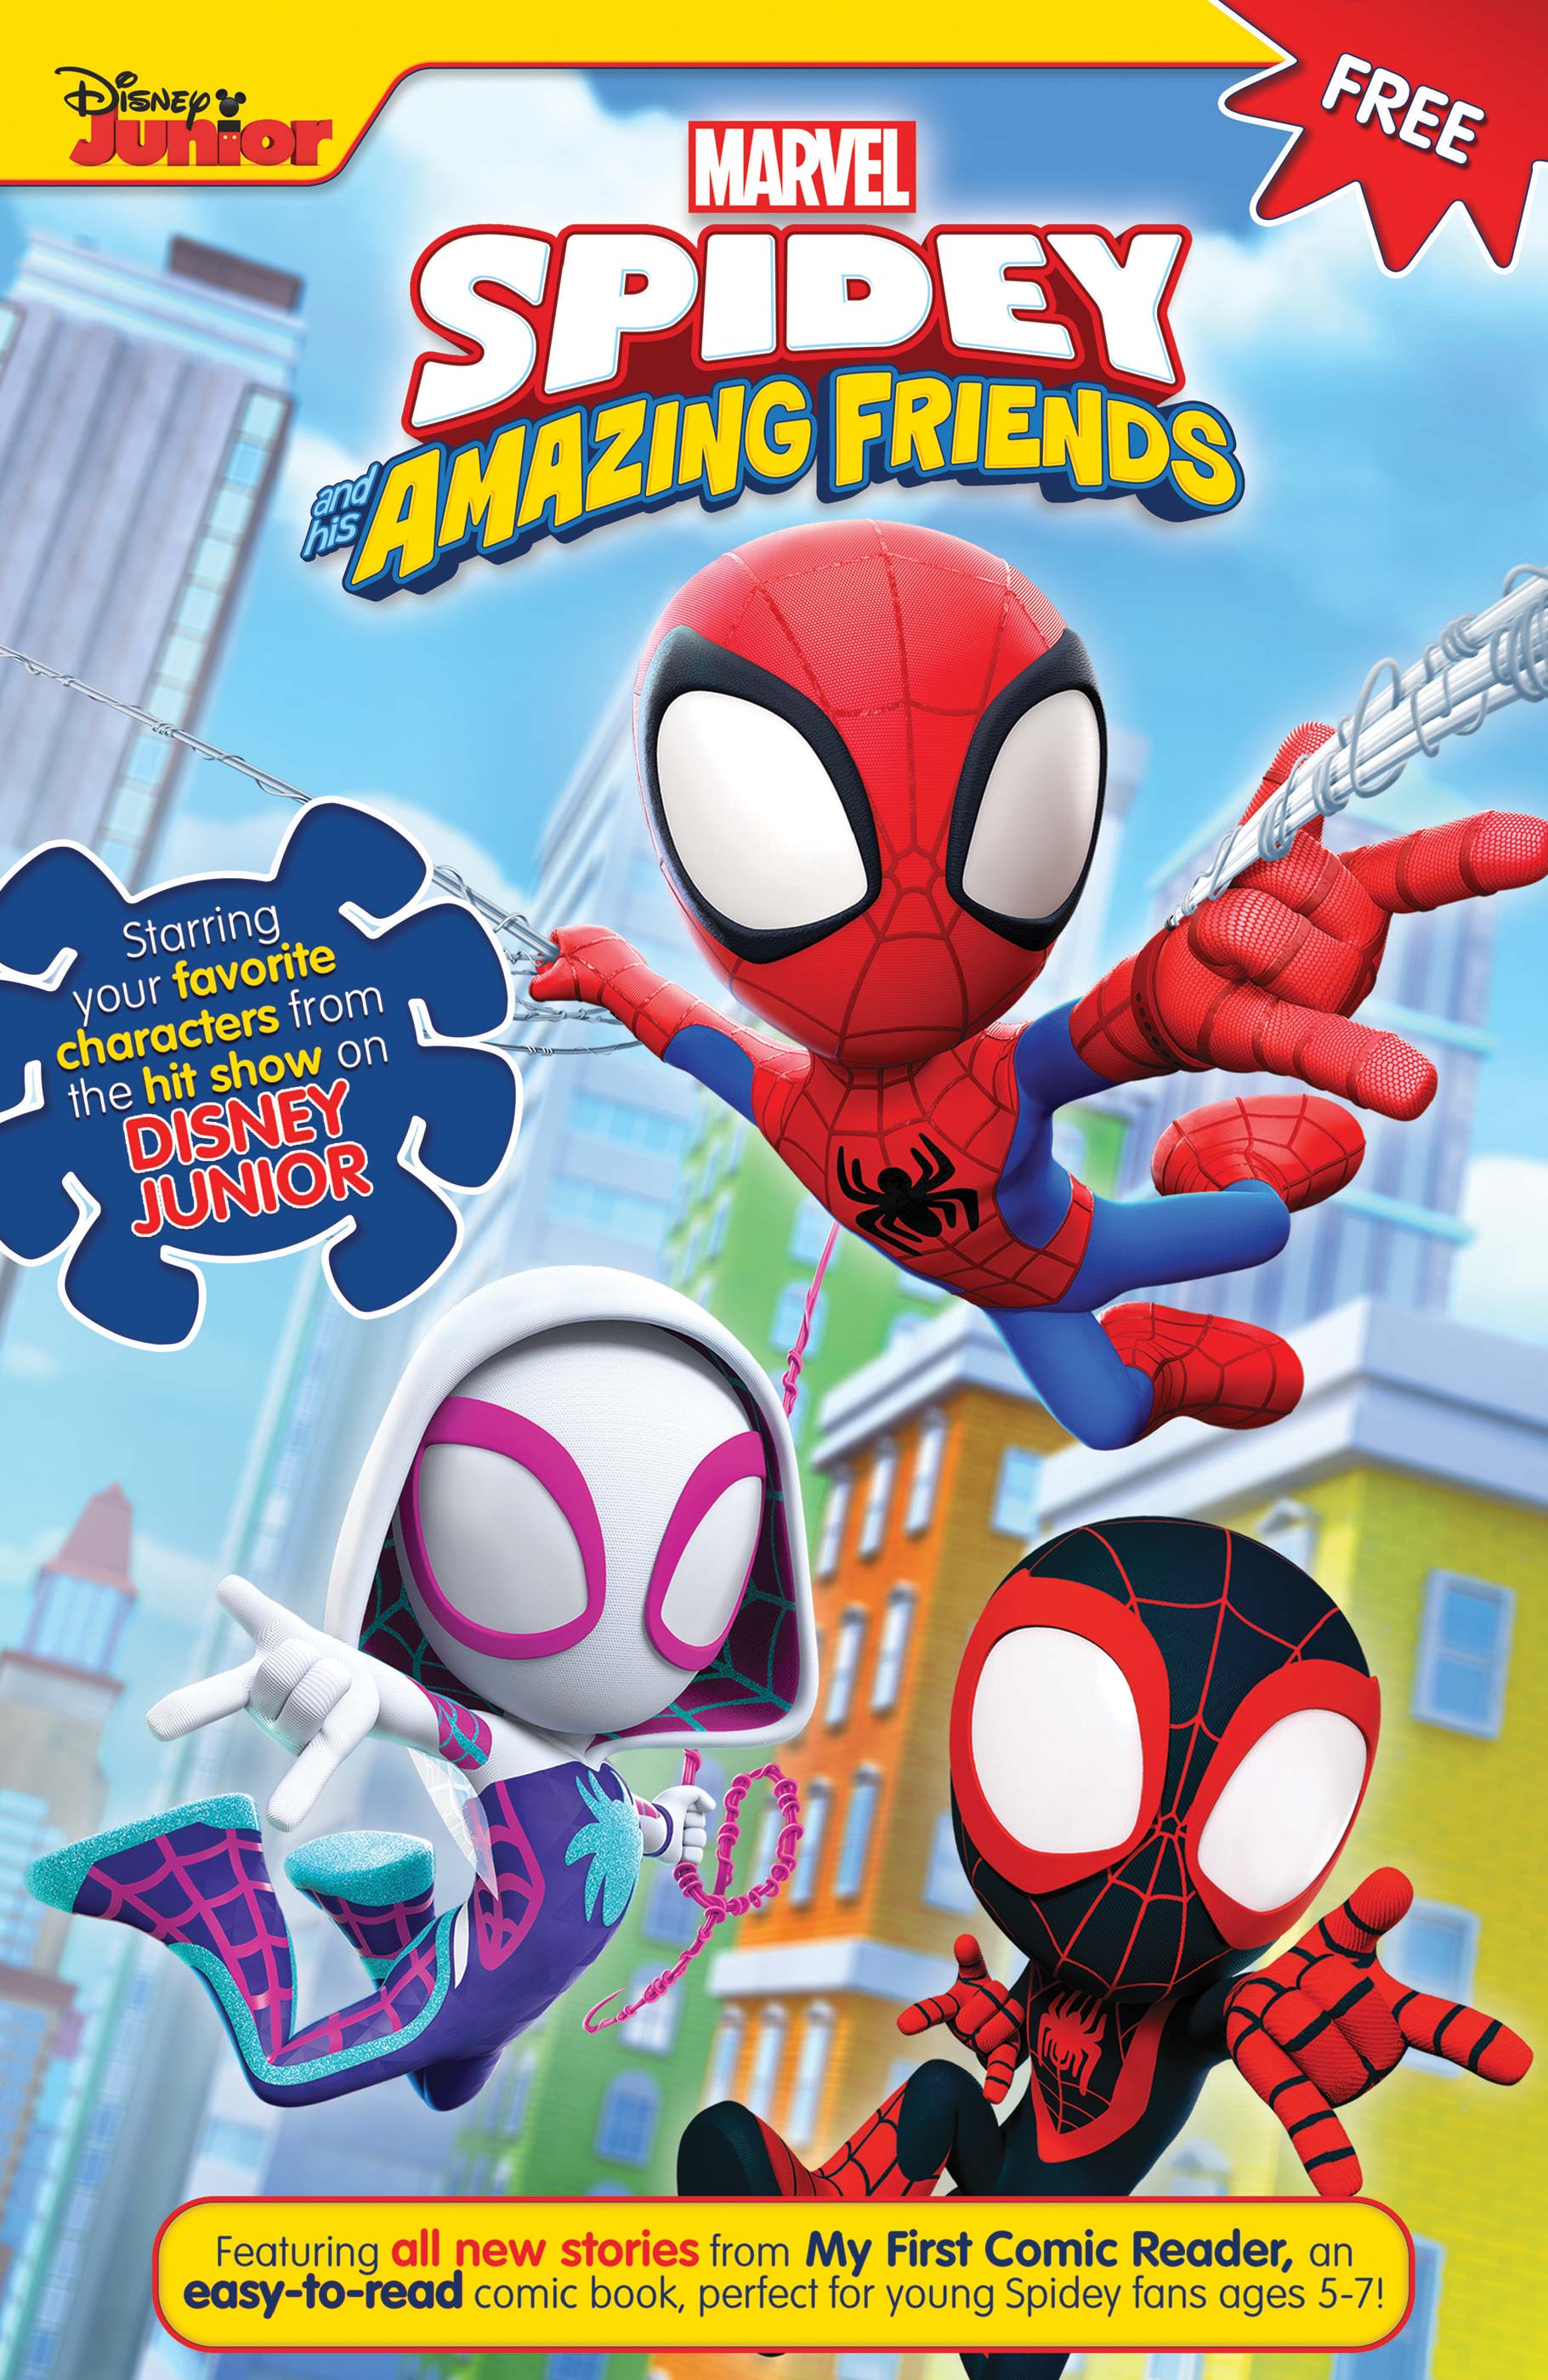 Marvel: Spidey and His Amazing Friends: Go, Team Spidey!, Book by Steve  Behling, Watermark Rights, Official Publisher Page